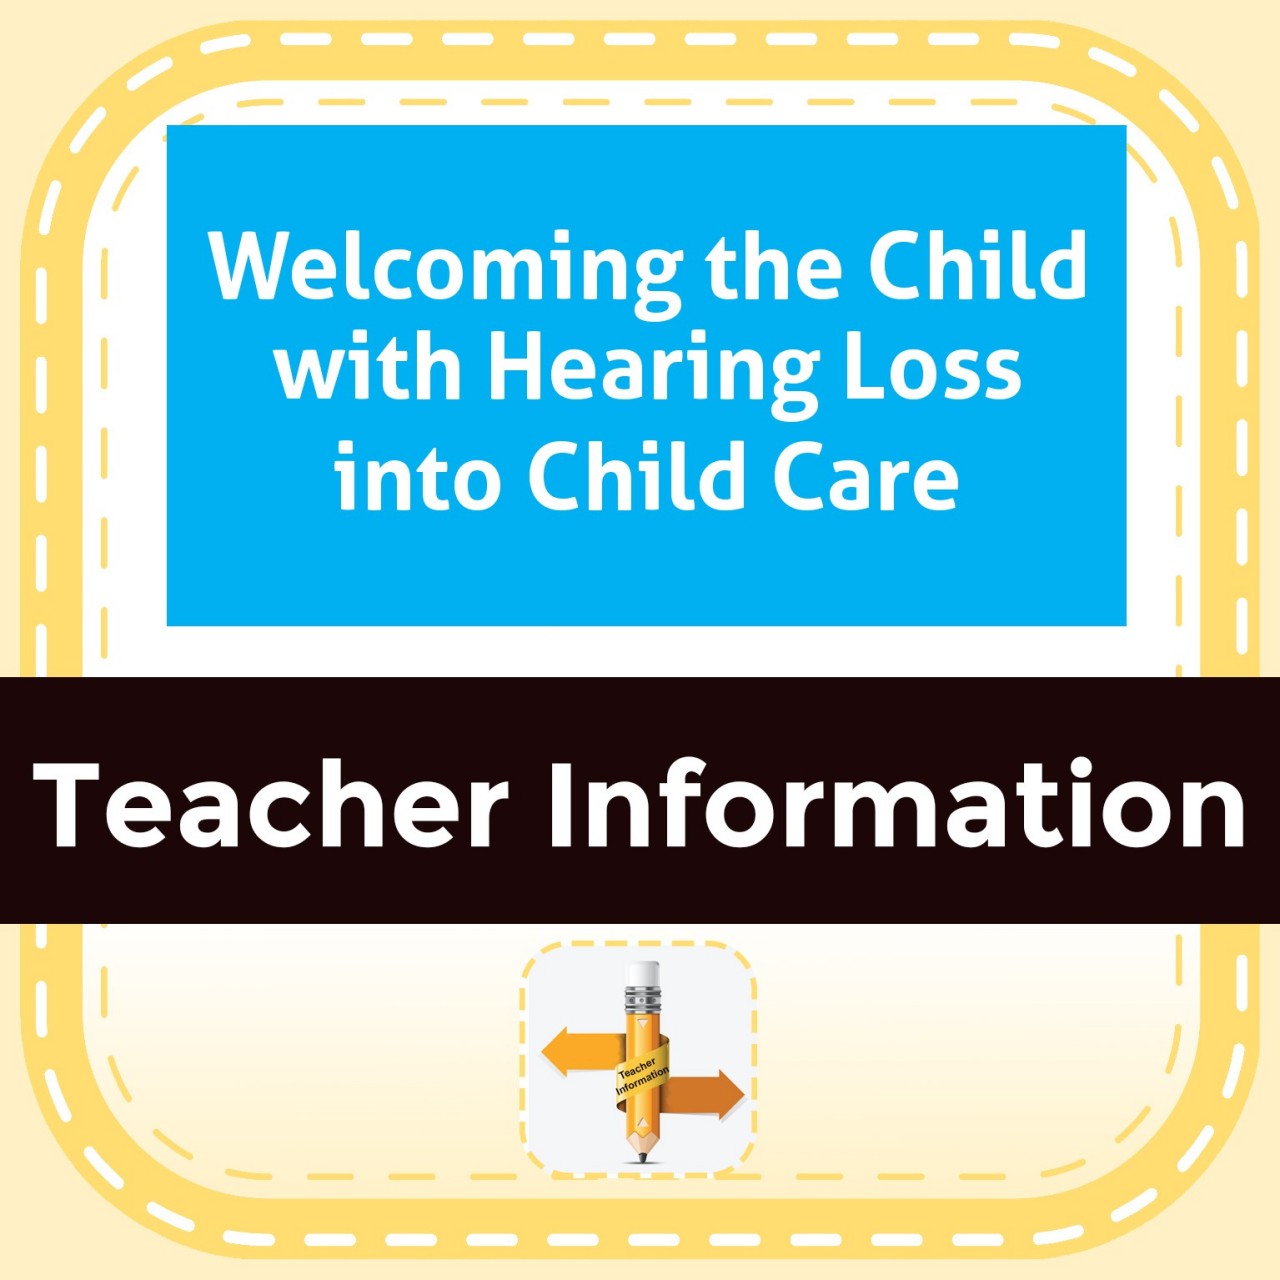 Welcoming the Child with Hearing Loss into Child Care